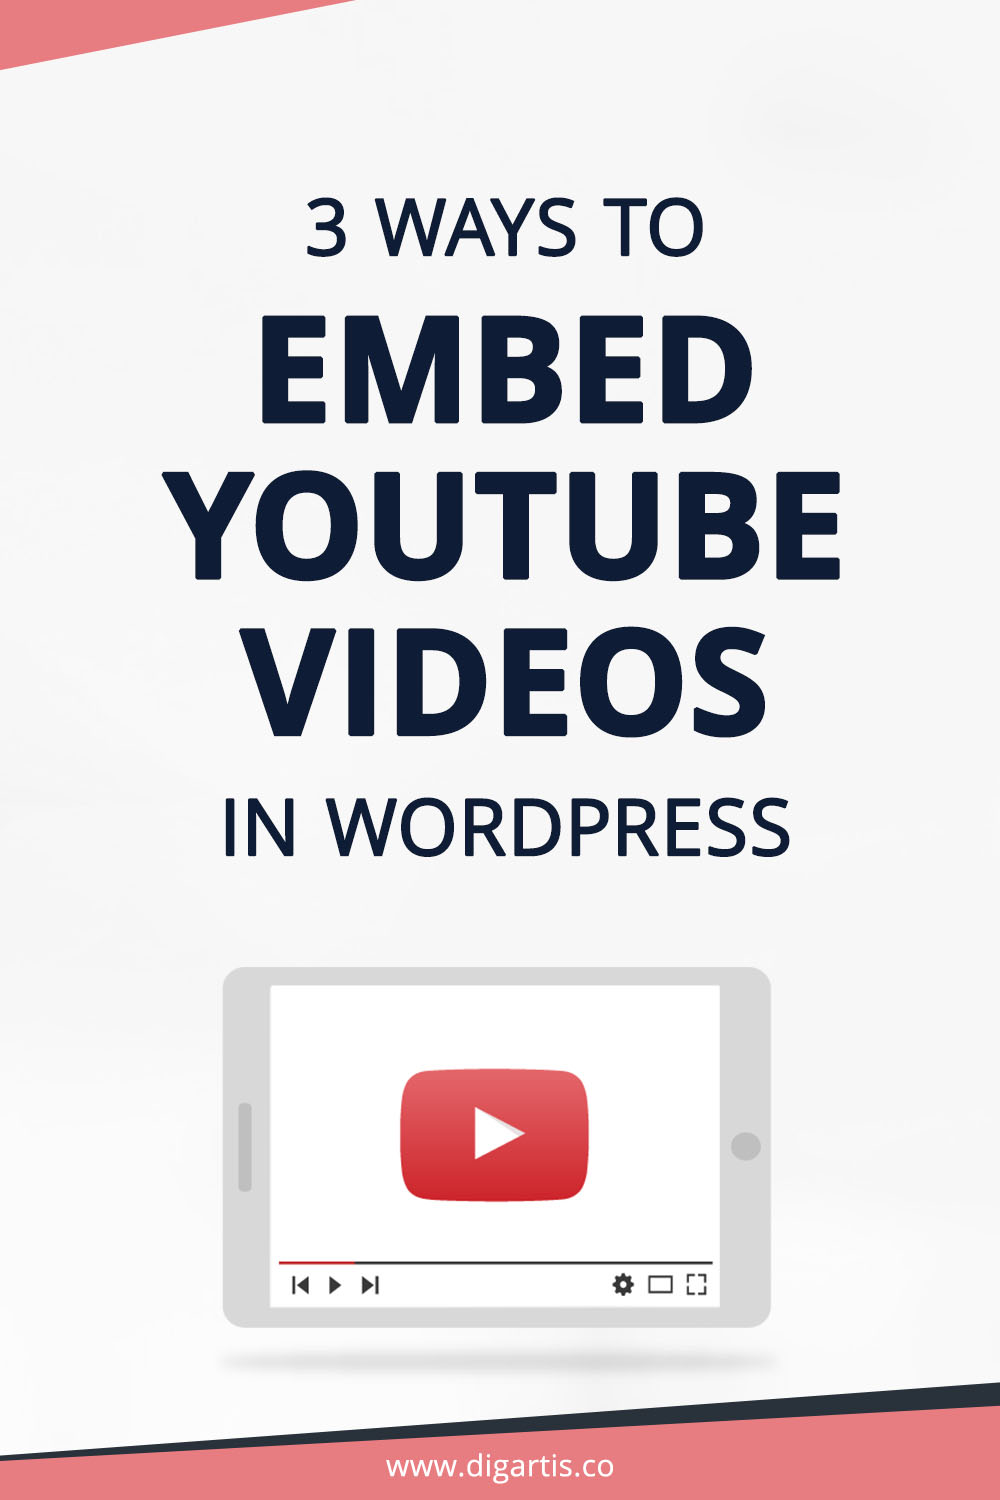 3 ways to embed YouTube videos in WordPress